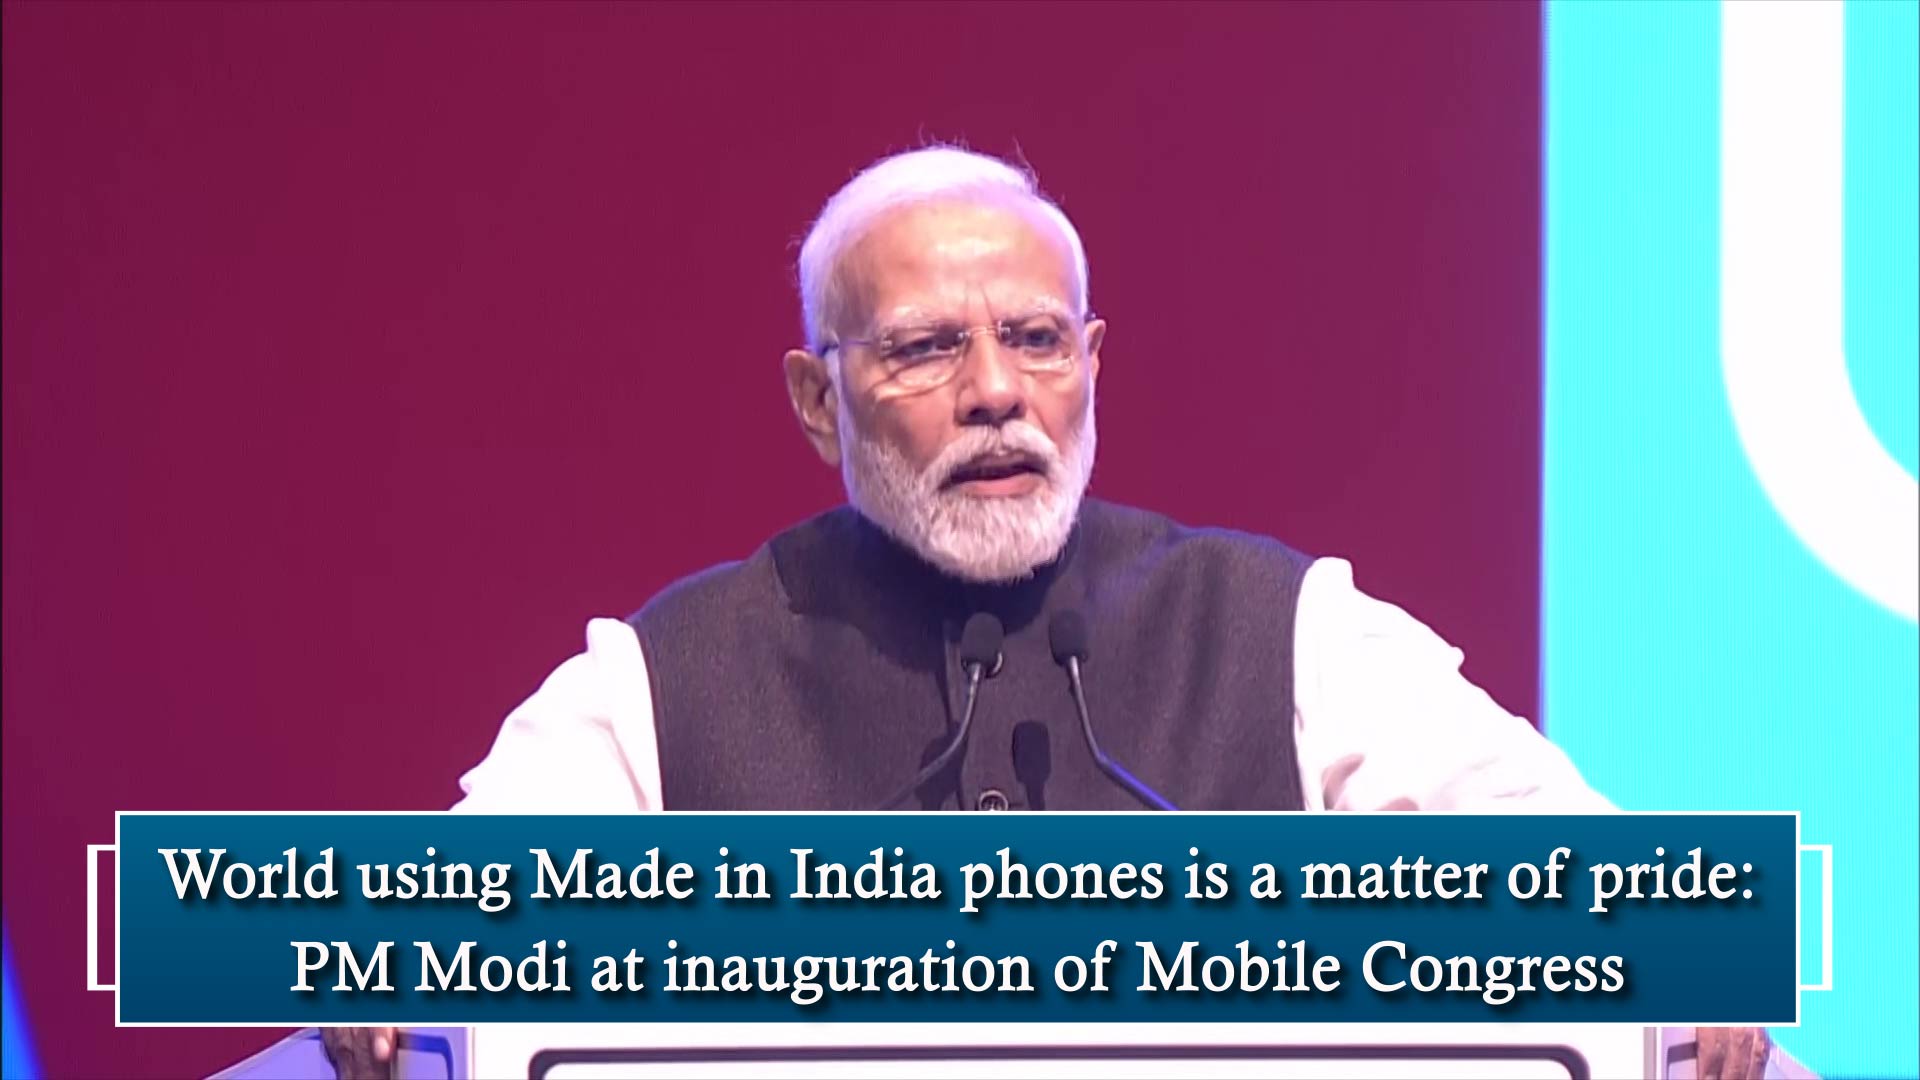 World using Made in India phones is a matter of pride: PM Narendra Modi at inauguration of Mobile Congress